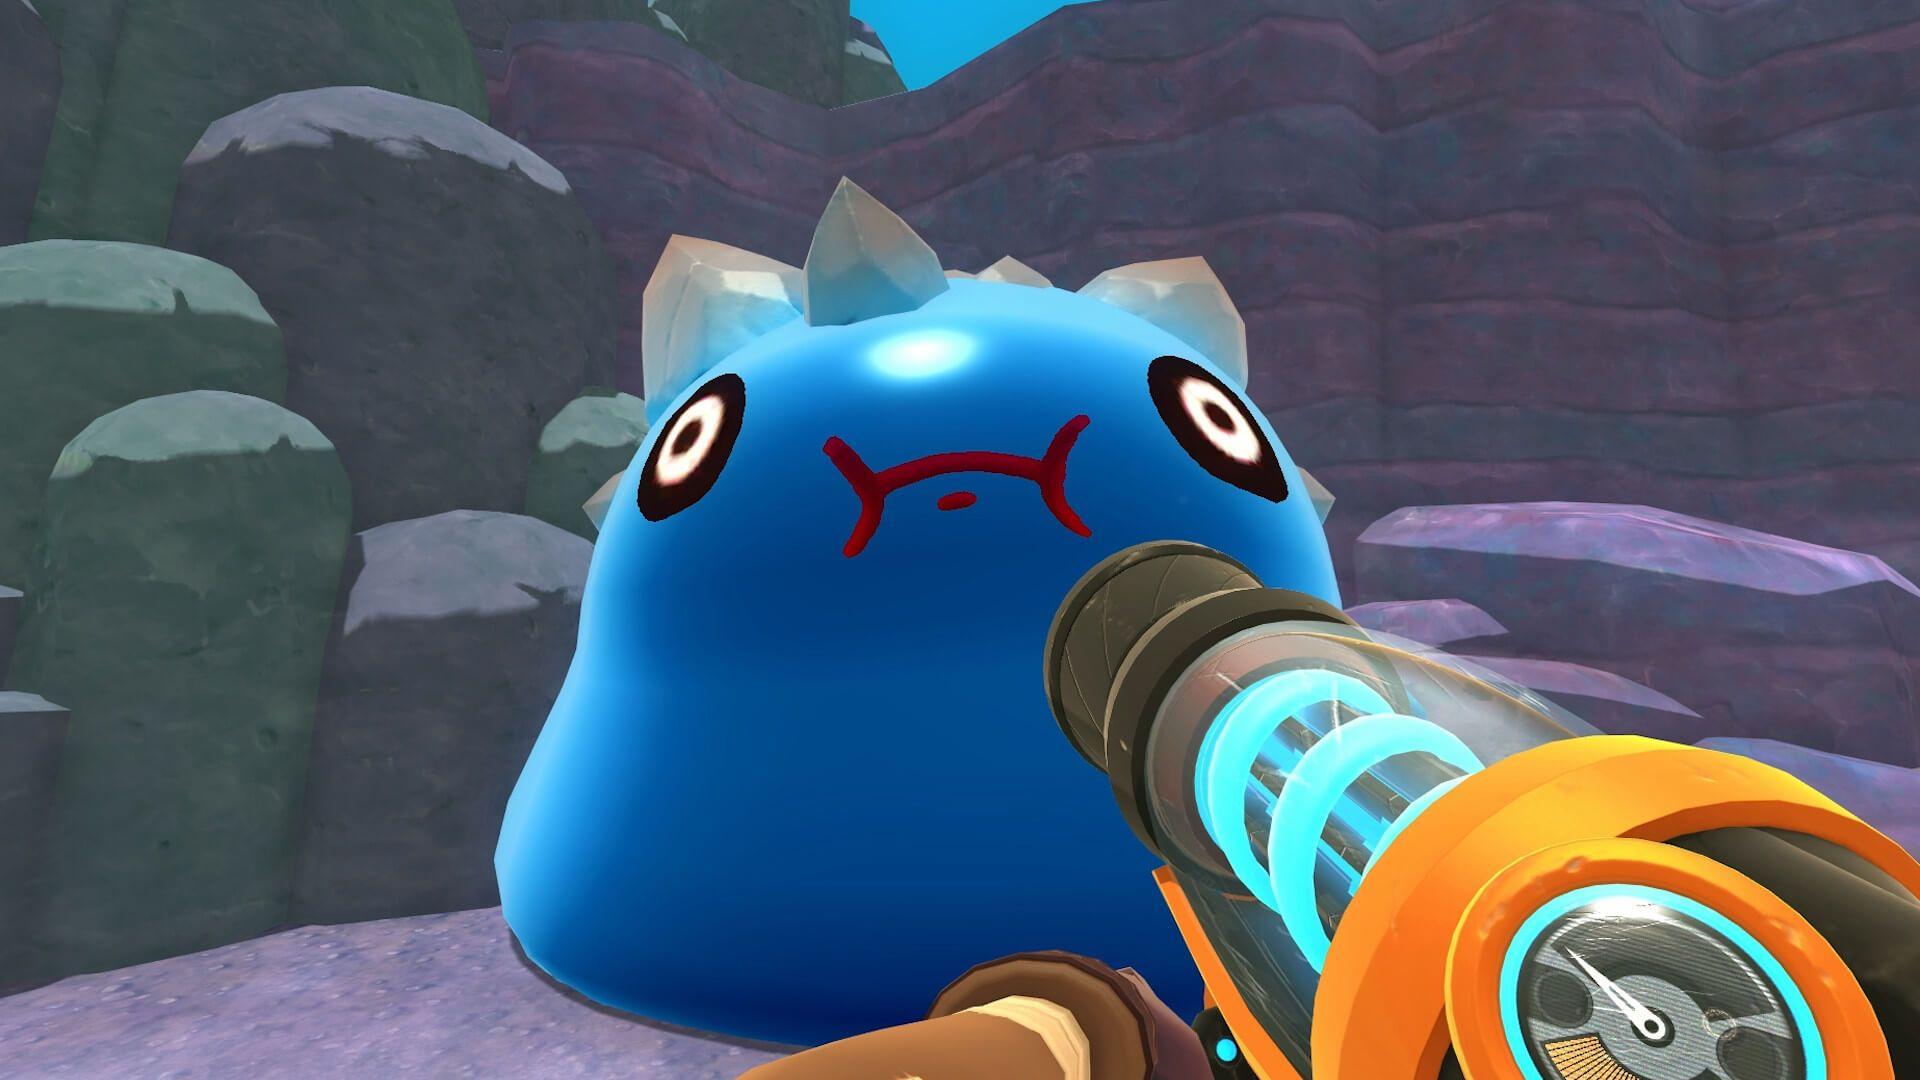 Slime Rancher Updated to Version 0.4.3